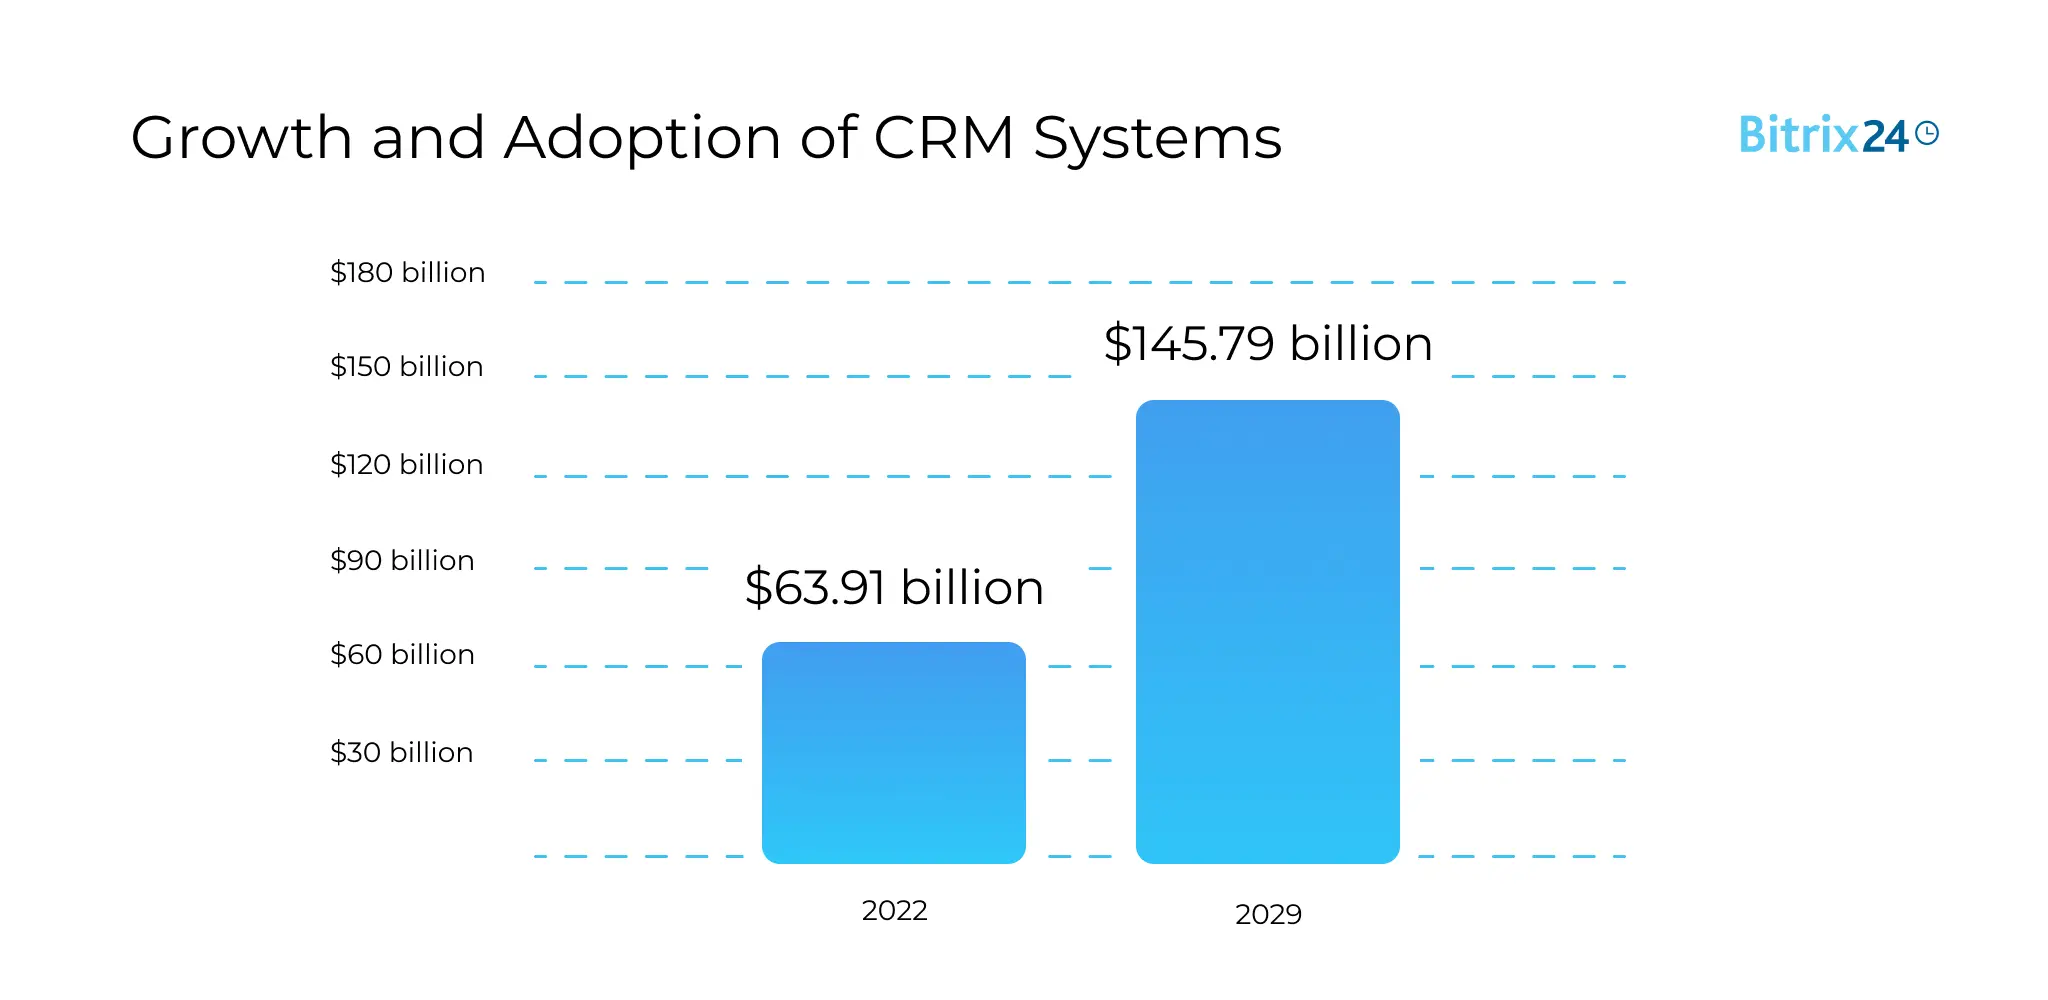 Growth and Adoption of CRM Systems